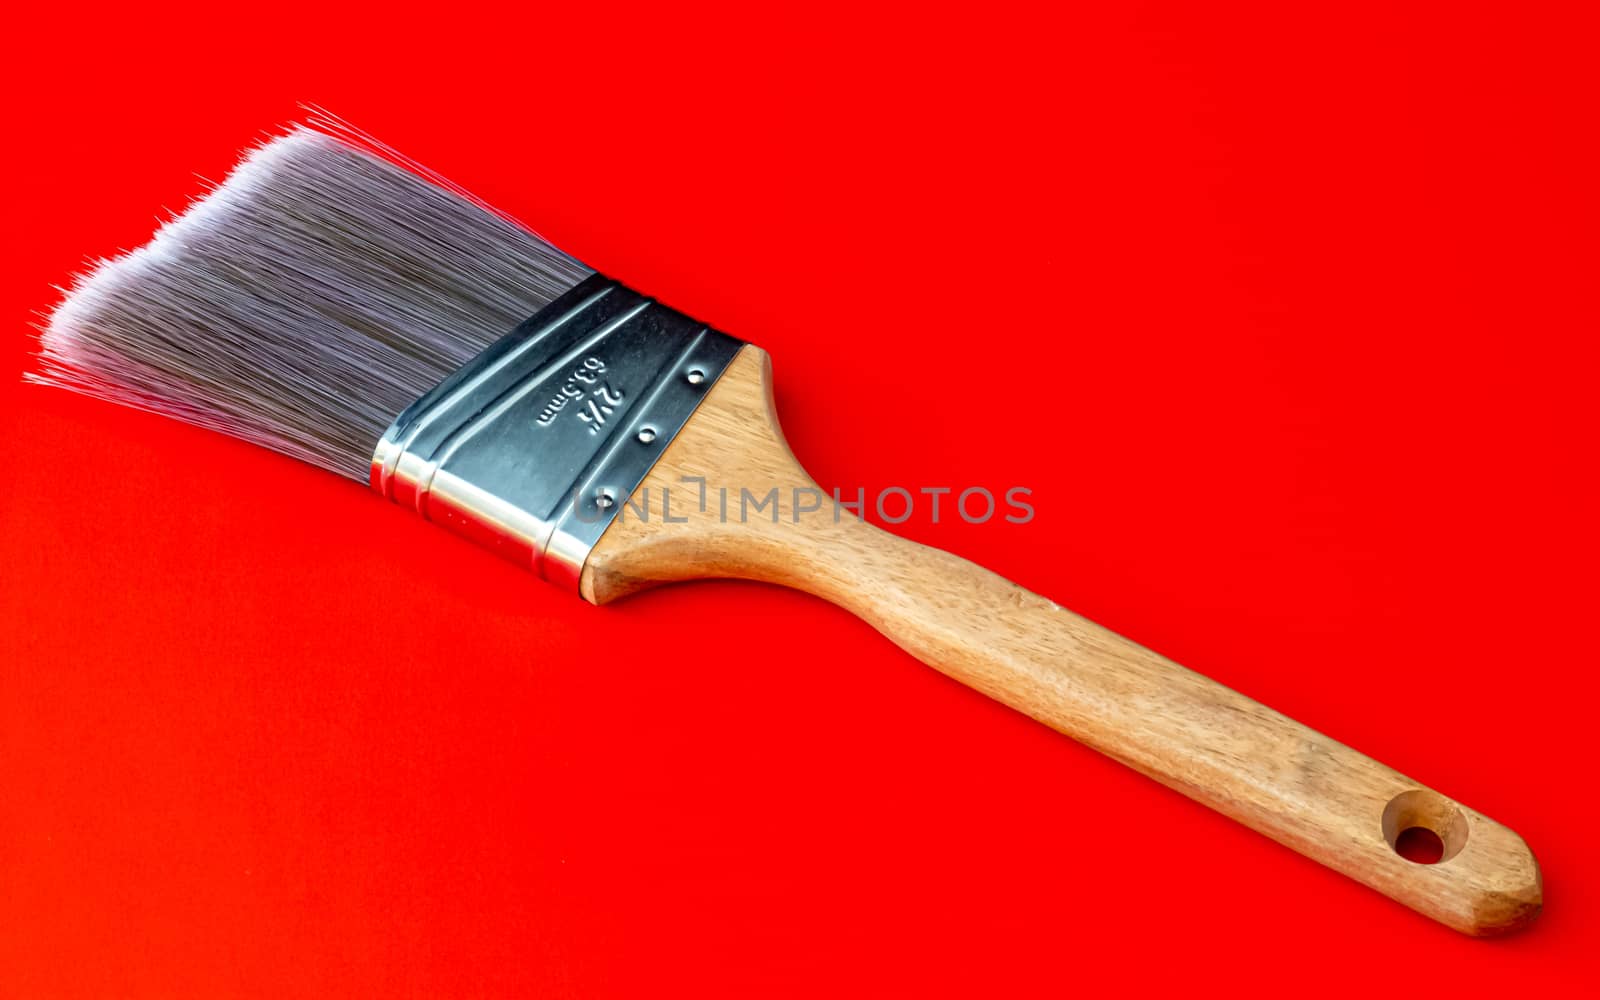 A large format paint brush sits on a solid red background. The paint brush has a wooden handle and polyester/nylon bristles emerging from a shiny stainless steel ferrule.